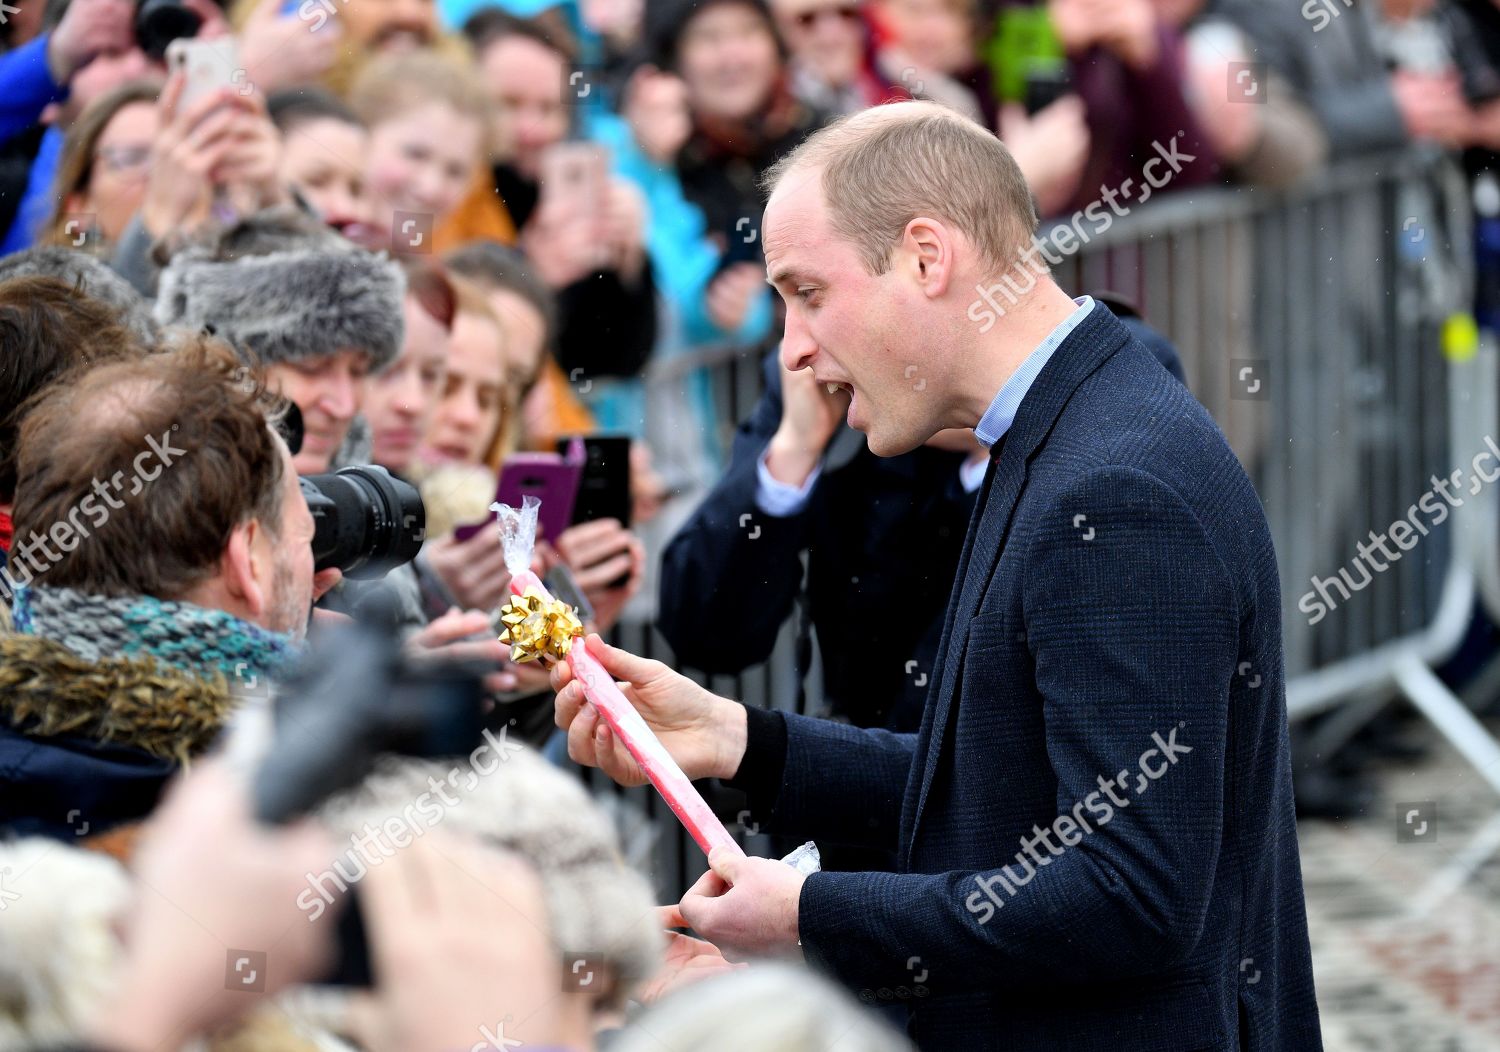 prince-william-and-catherine-duchess-of-cambridge-visit-to-blackpool-uk-shutterstock-editorial-10143623s.jpg